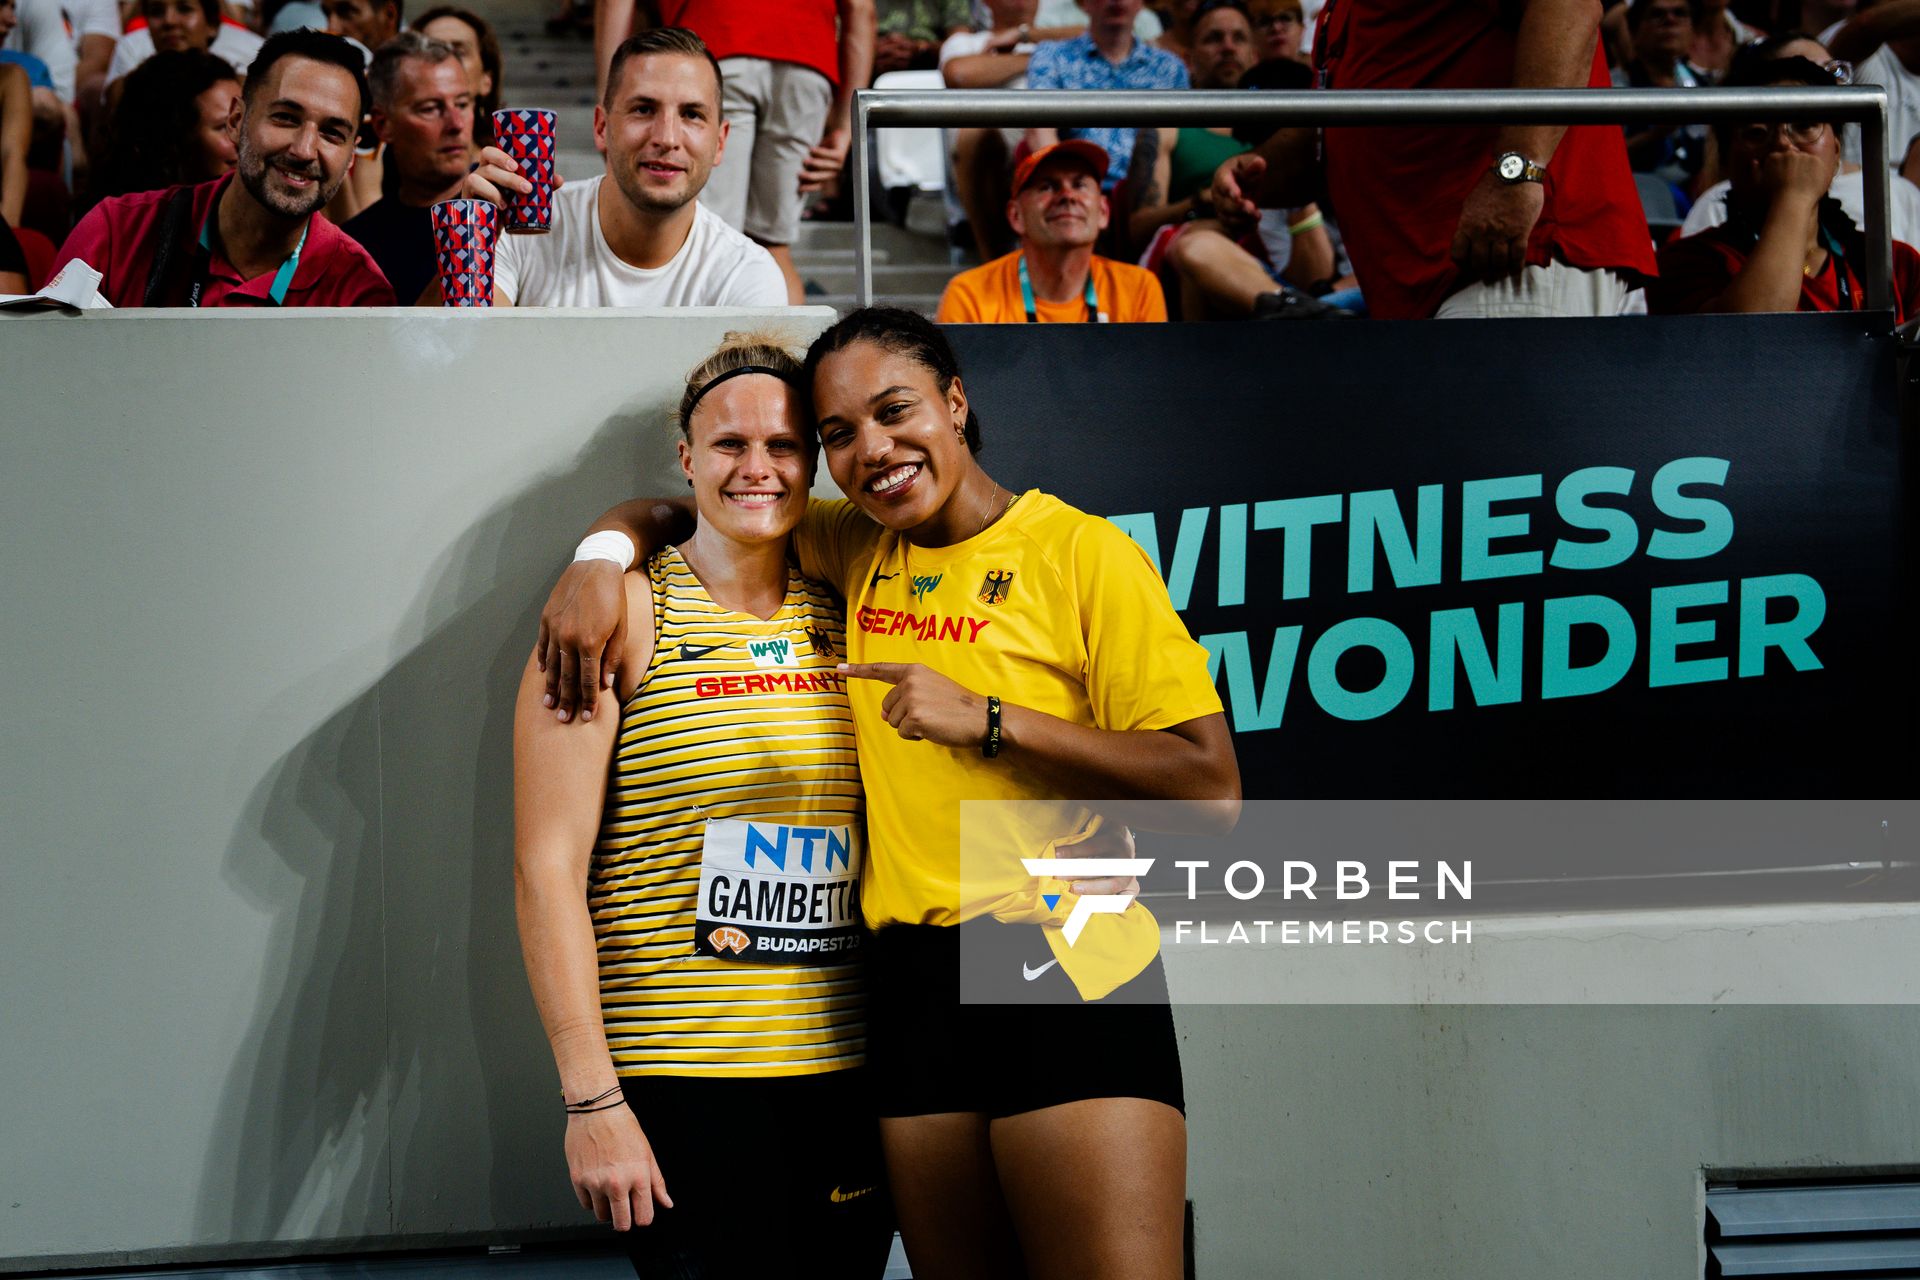 Sara Gambetta (GER/Germany), Yemisi Ogunleye (GER/Germany) during the Shot Put on Day 8 of the World Athletics Championships Budapest 23 at the National Athletics Centre in Budapest, Hungary on August 26, 2023.